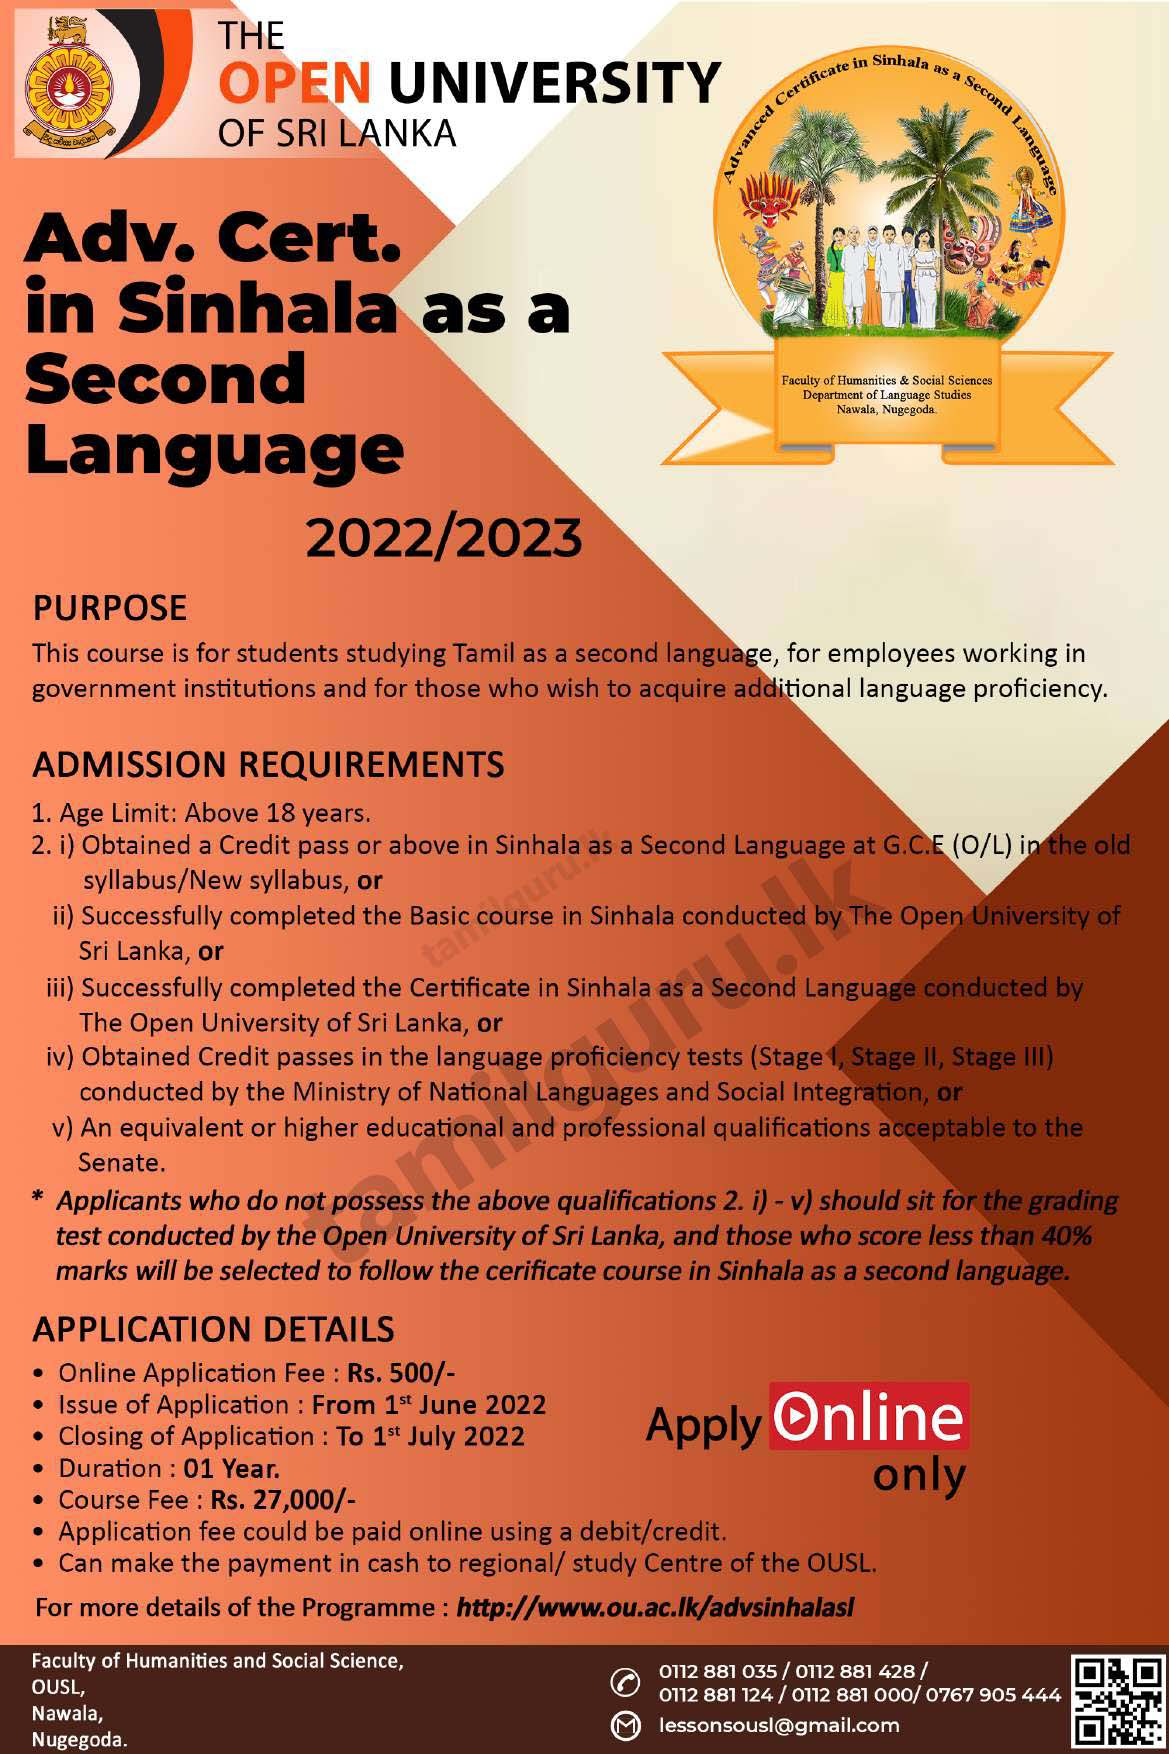 Advanced Certificate in Sinhala as a Second Language Course 2022/2023 - The Open University of Sri Lanka (OUSL)